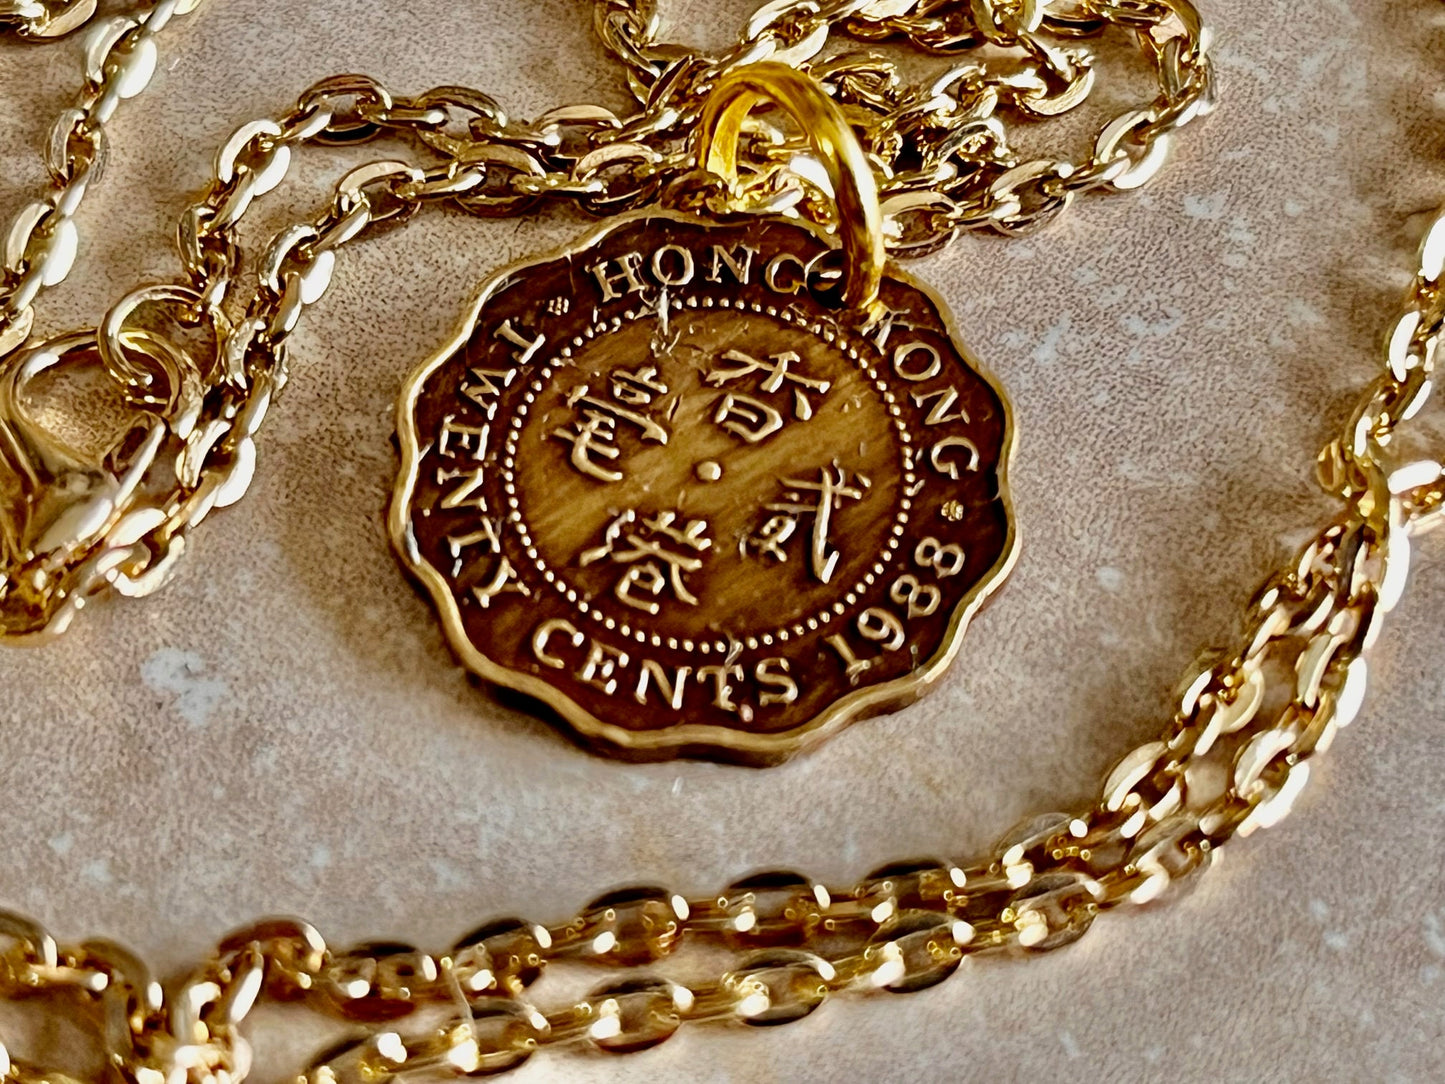 Hong Kong Coin Pendant 20 Cents China Necklace Handmade Custom Charm Gift For Friend Coin Charm Gift For Him, Coin Collector, World Coins